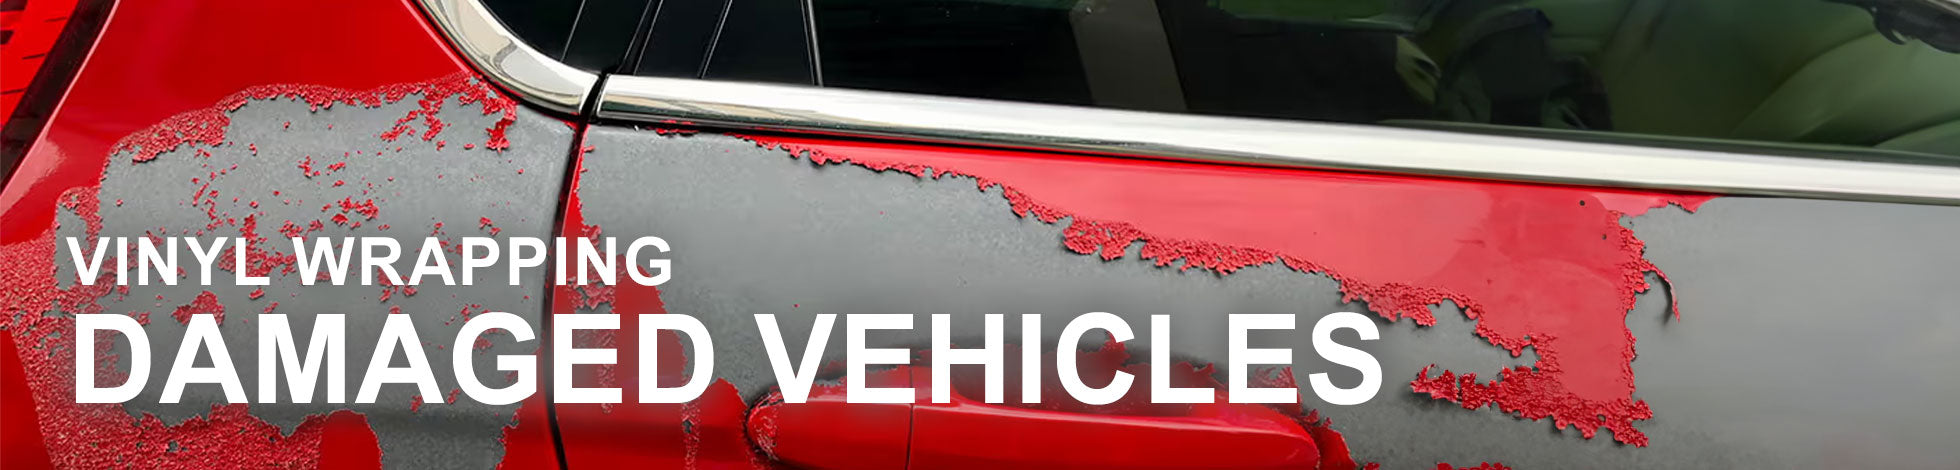 Wrapping a Damaged Vehicle?